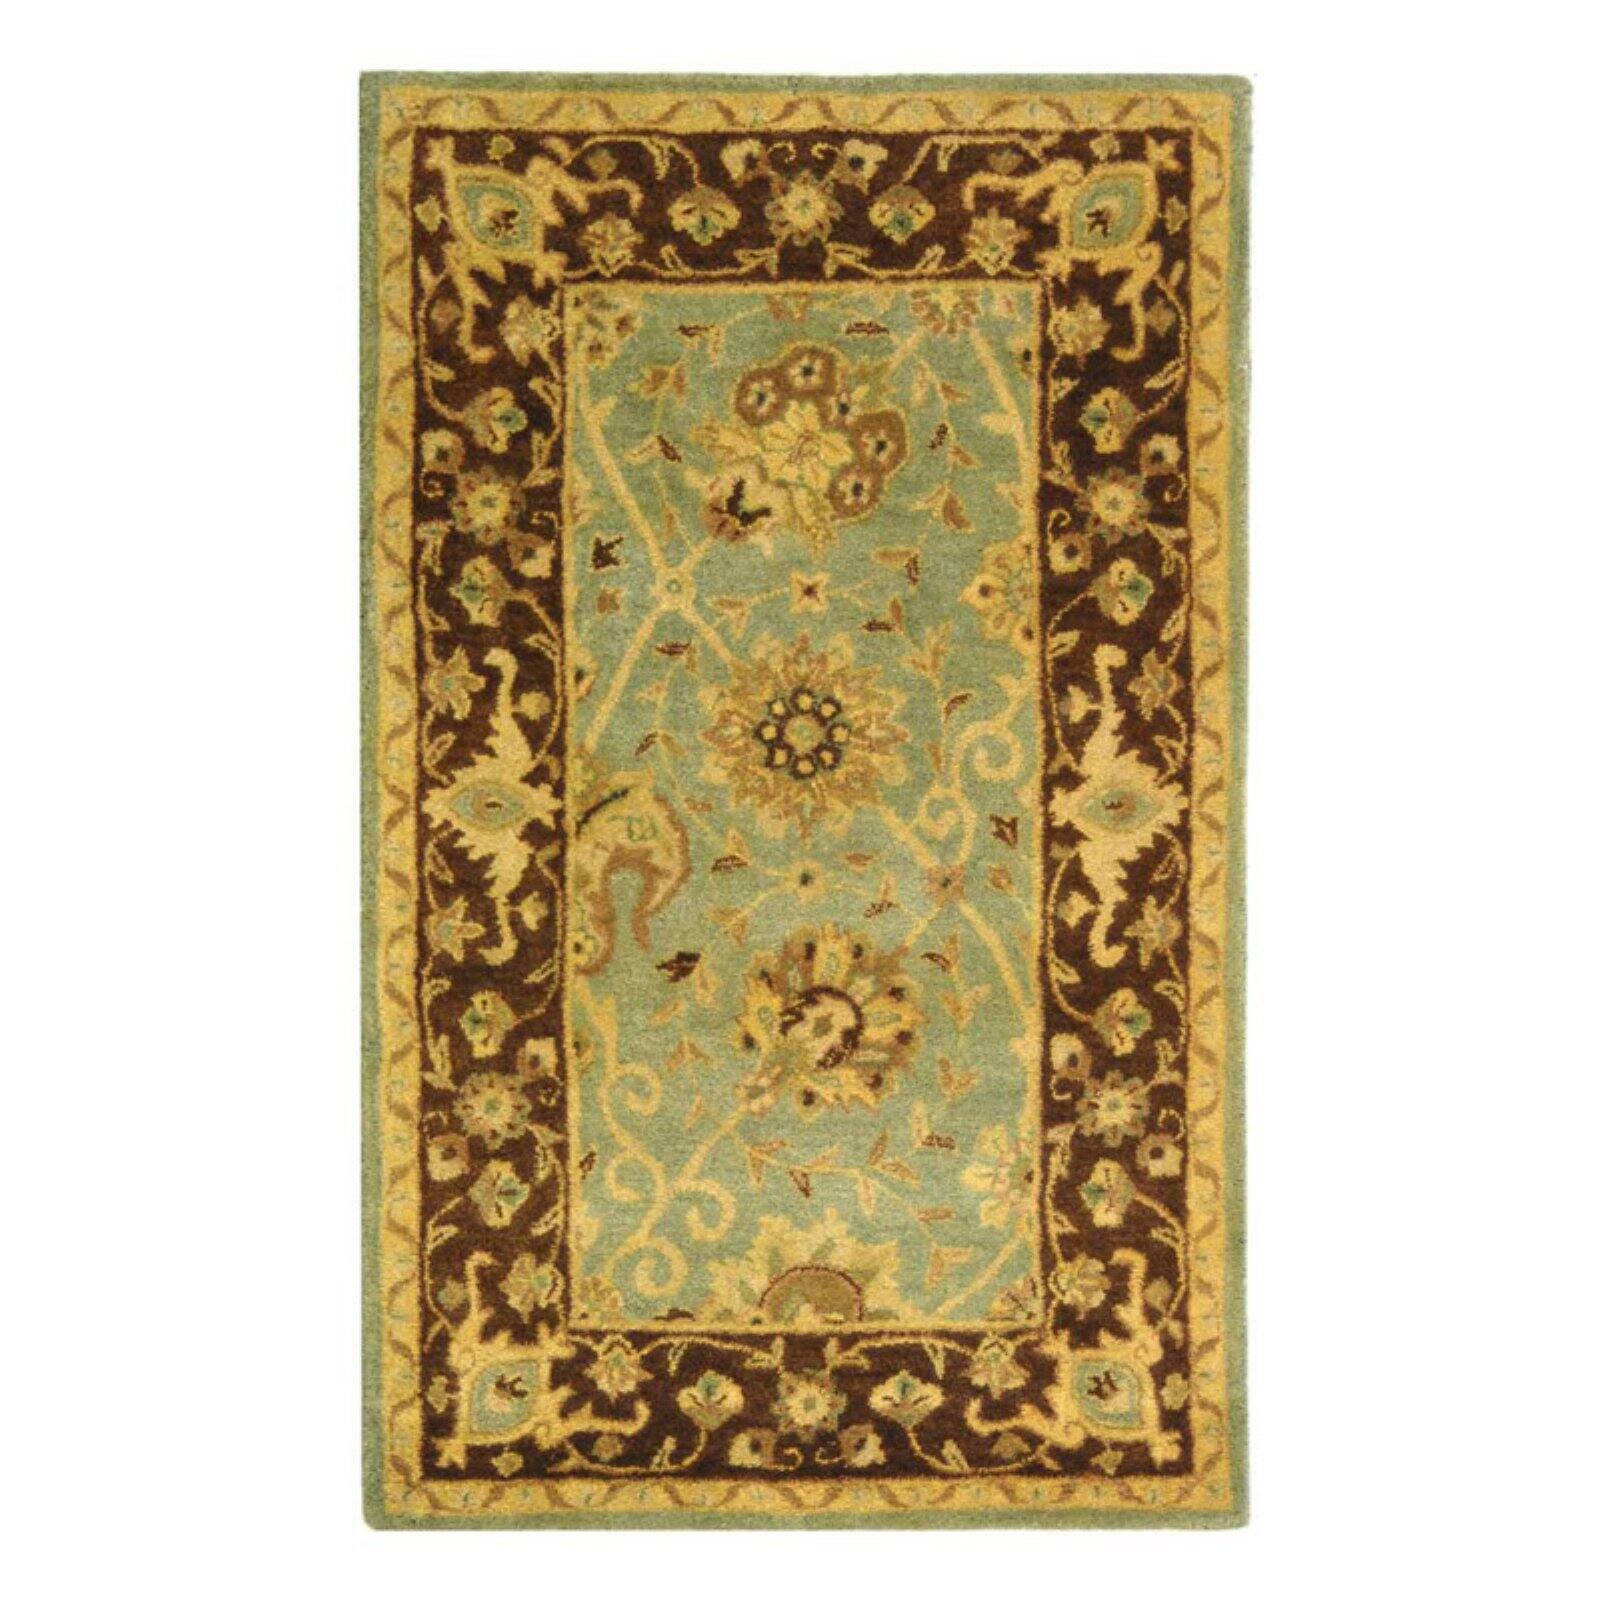 SAFAVIEH Antiquity Lilibeth Traditional Floral Wool Runner Rug, Green/Brown, 2'3" x 8' - image 3 of 8